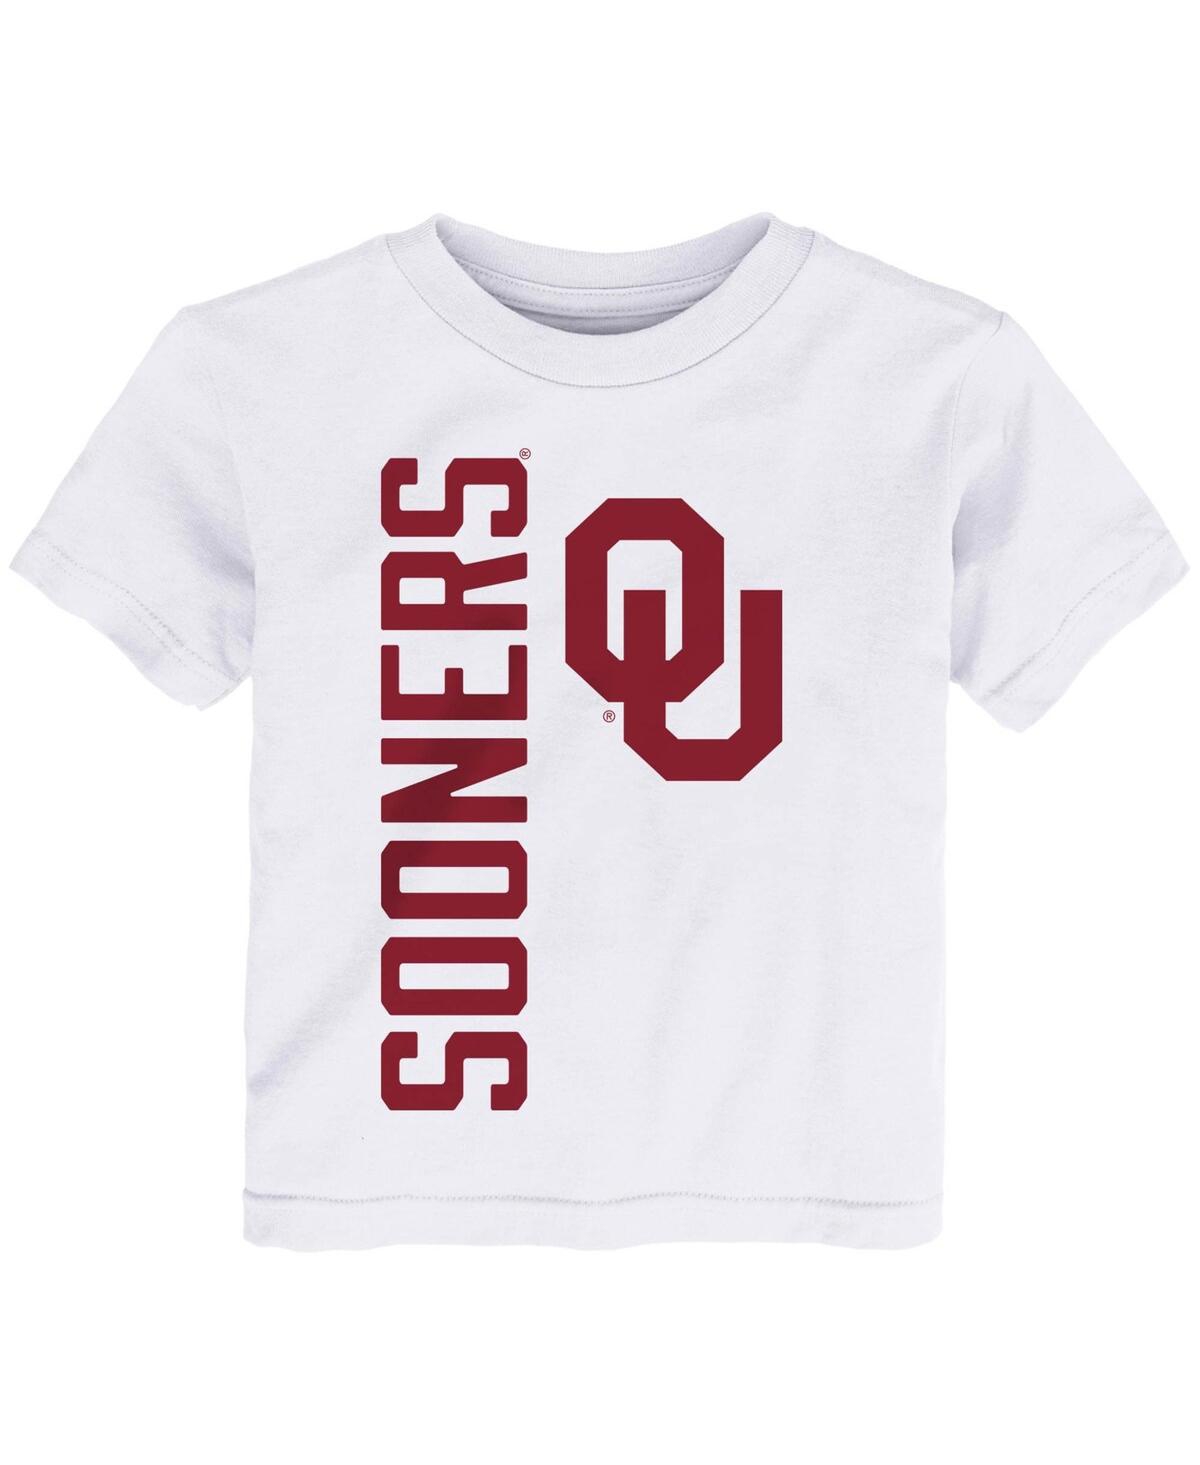 Outerstuff Babies' Boys And Girls Toddler White Oklahoma Sooners Big & Bold T-shirt